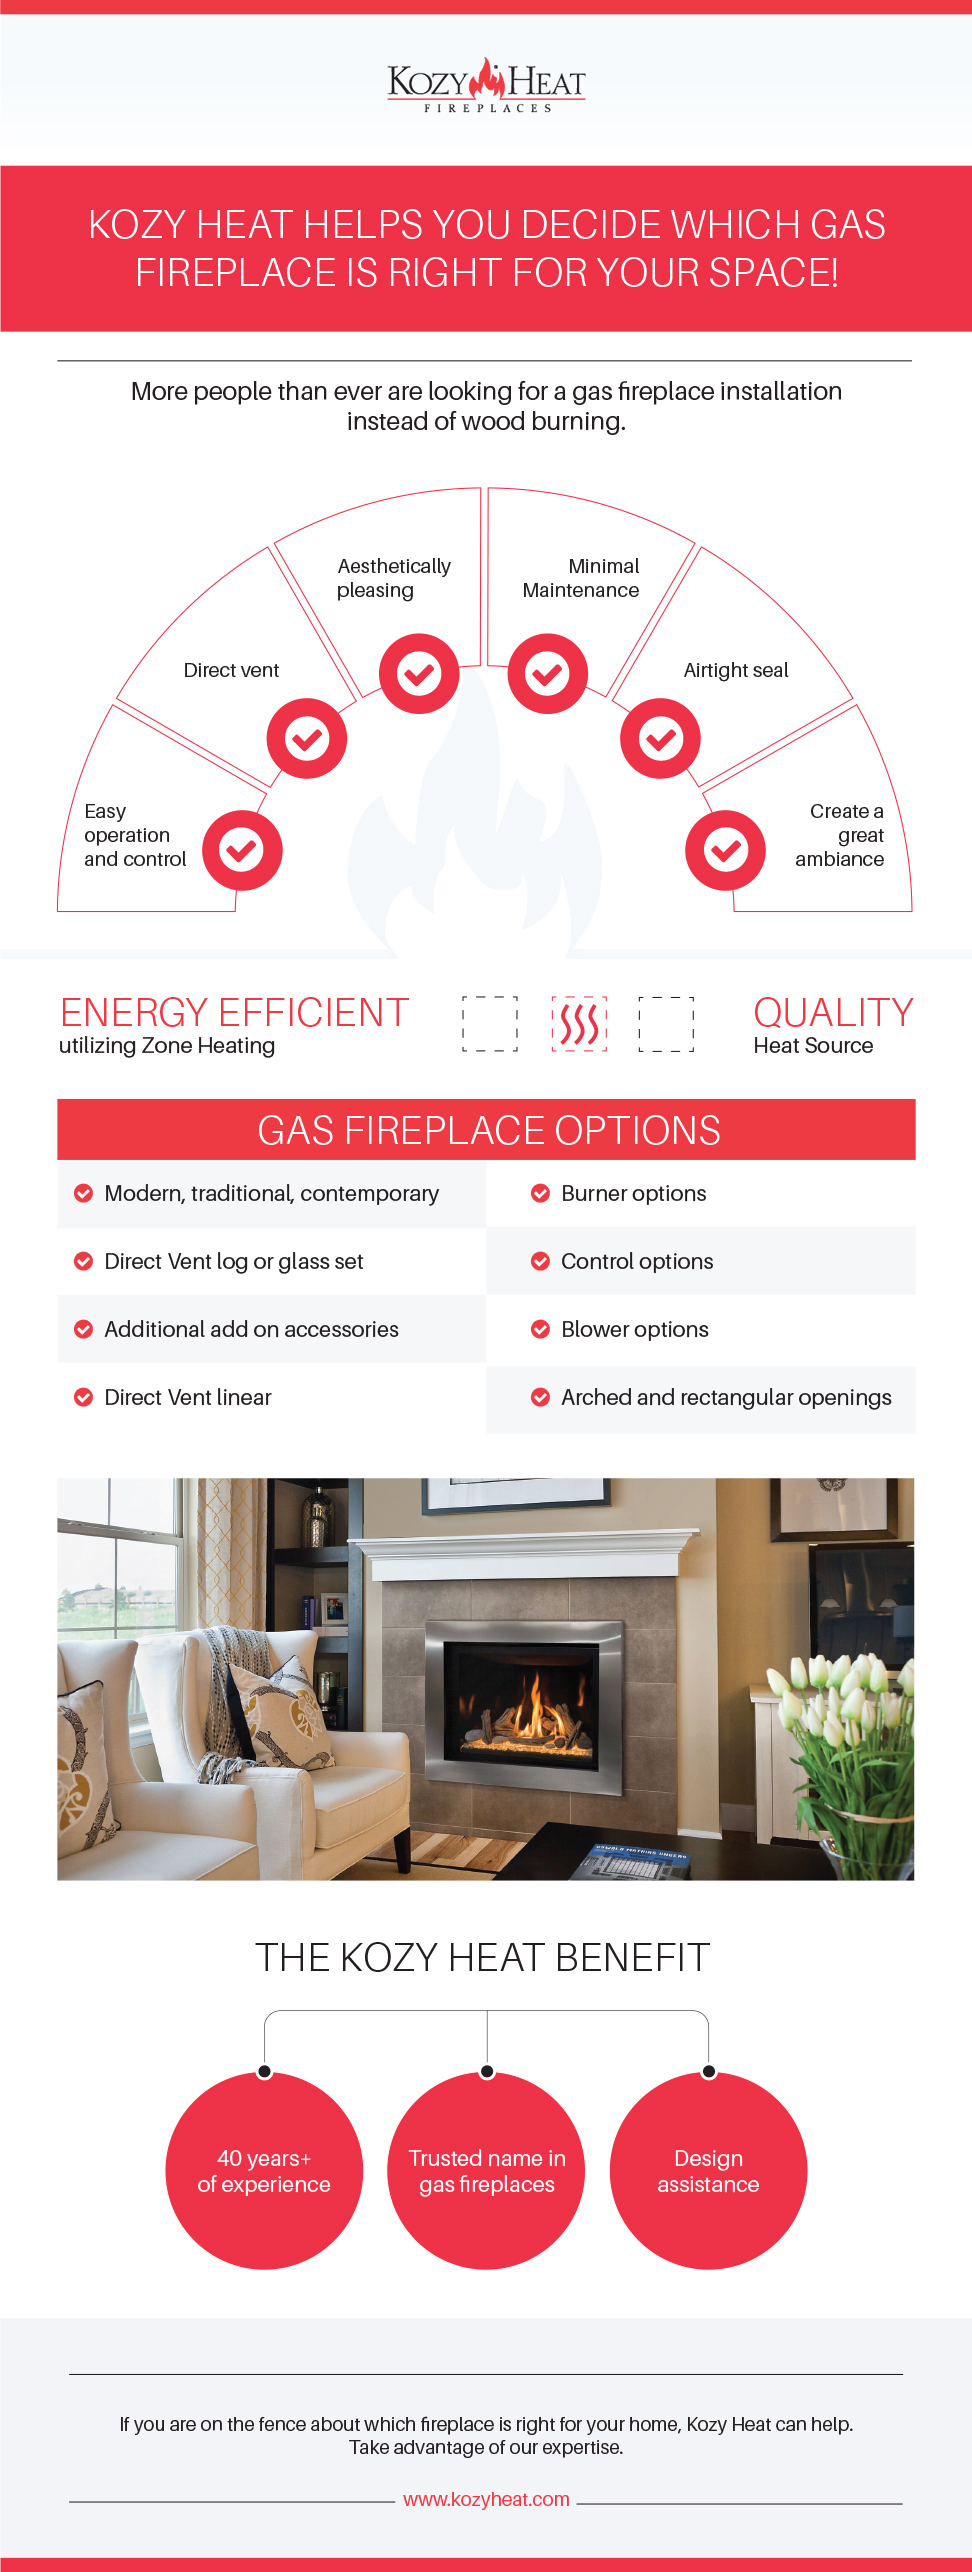 Kozy Heat Helps You Decide Which Gas Fireplace Is Right For Your Space!